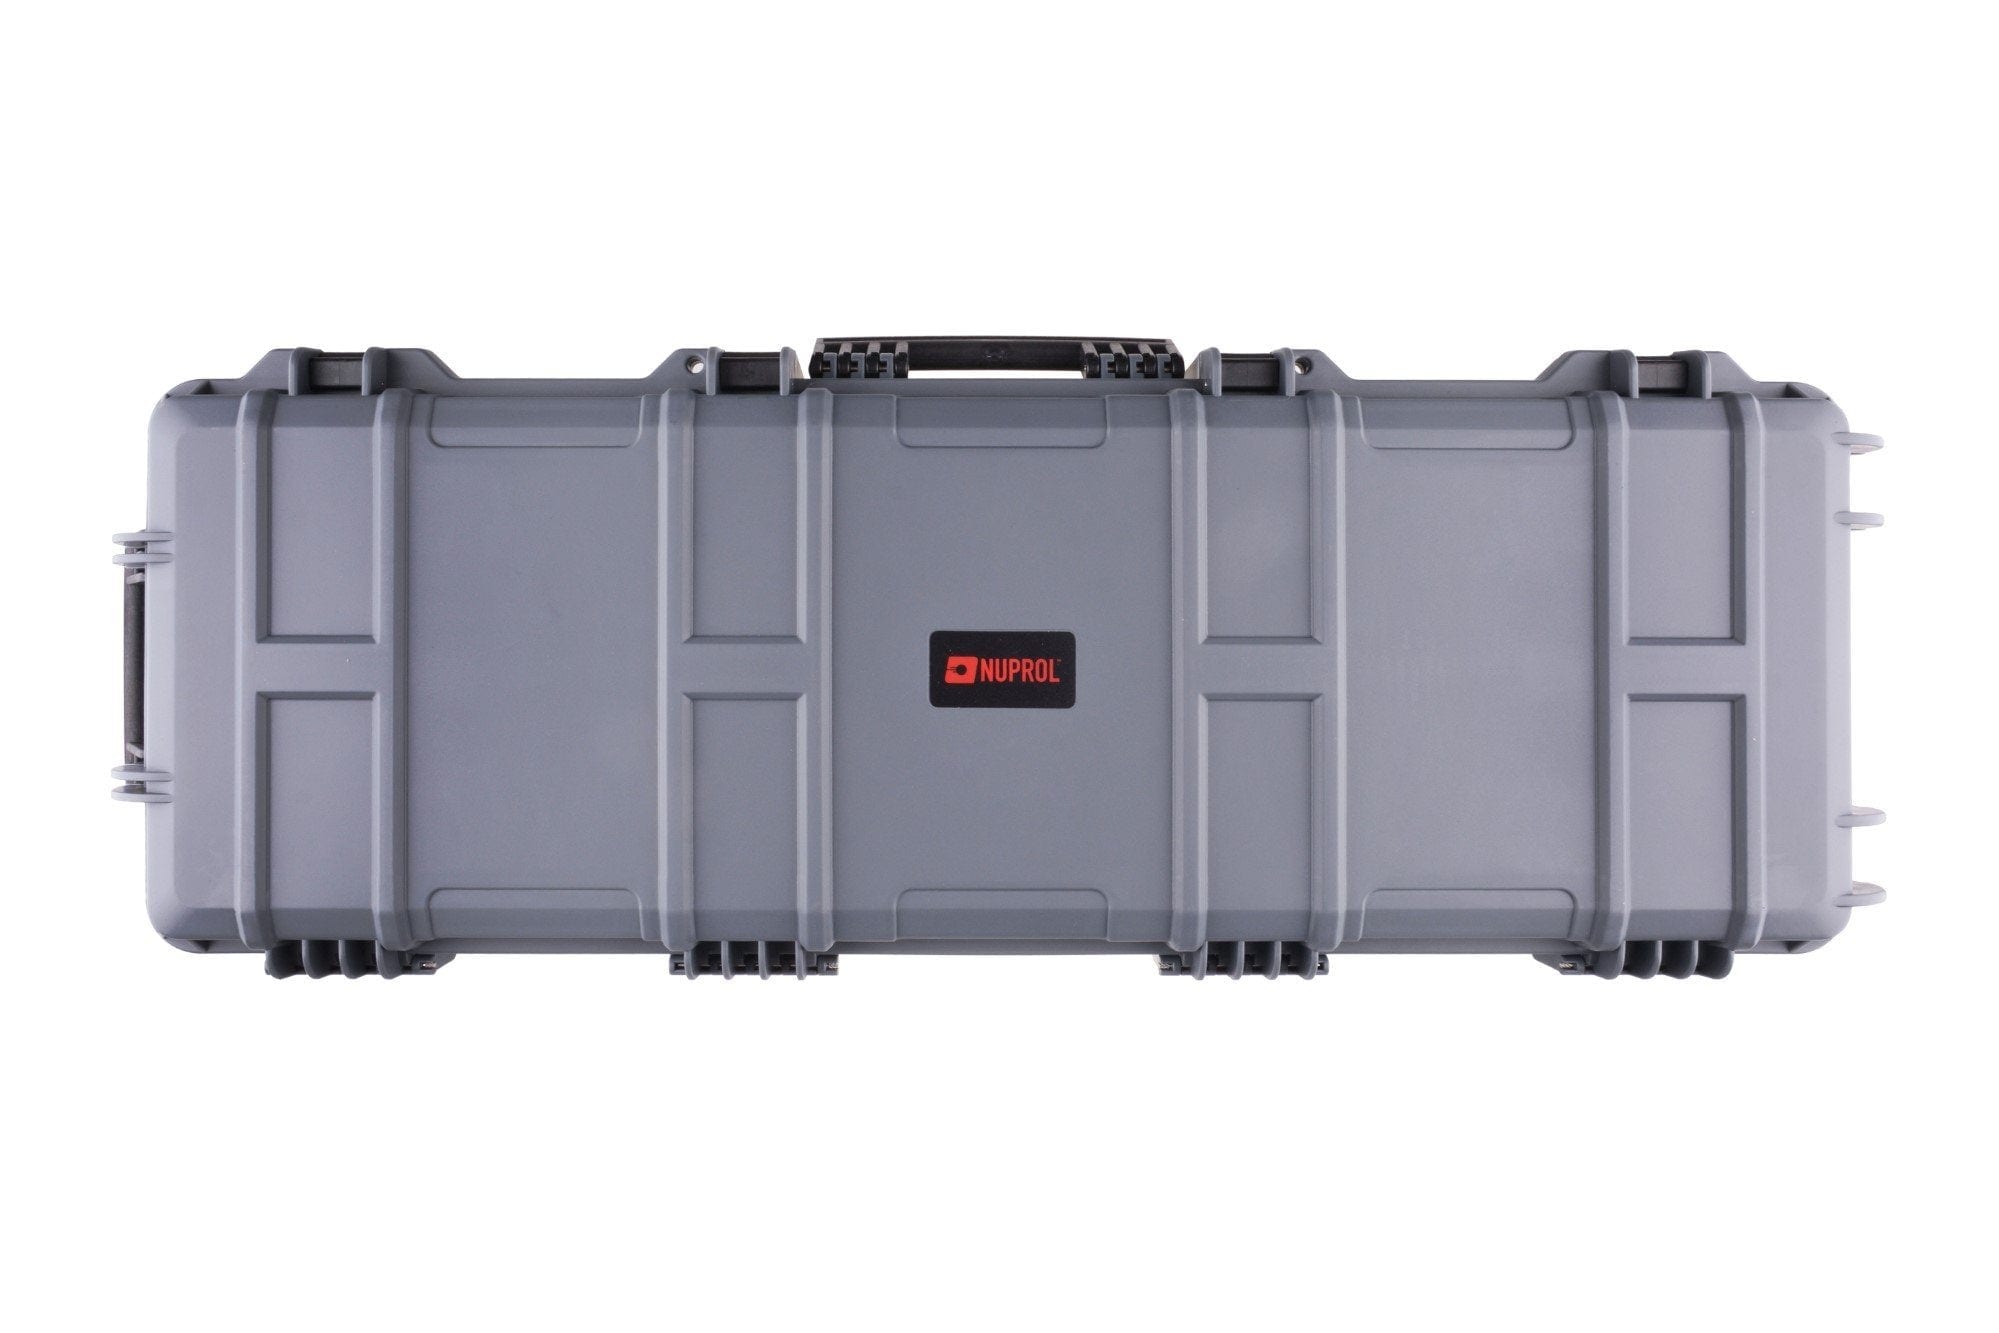 Nuprol PNP Hard Case 110cm - Grey by Nuprol on Airsoft Mania Europe